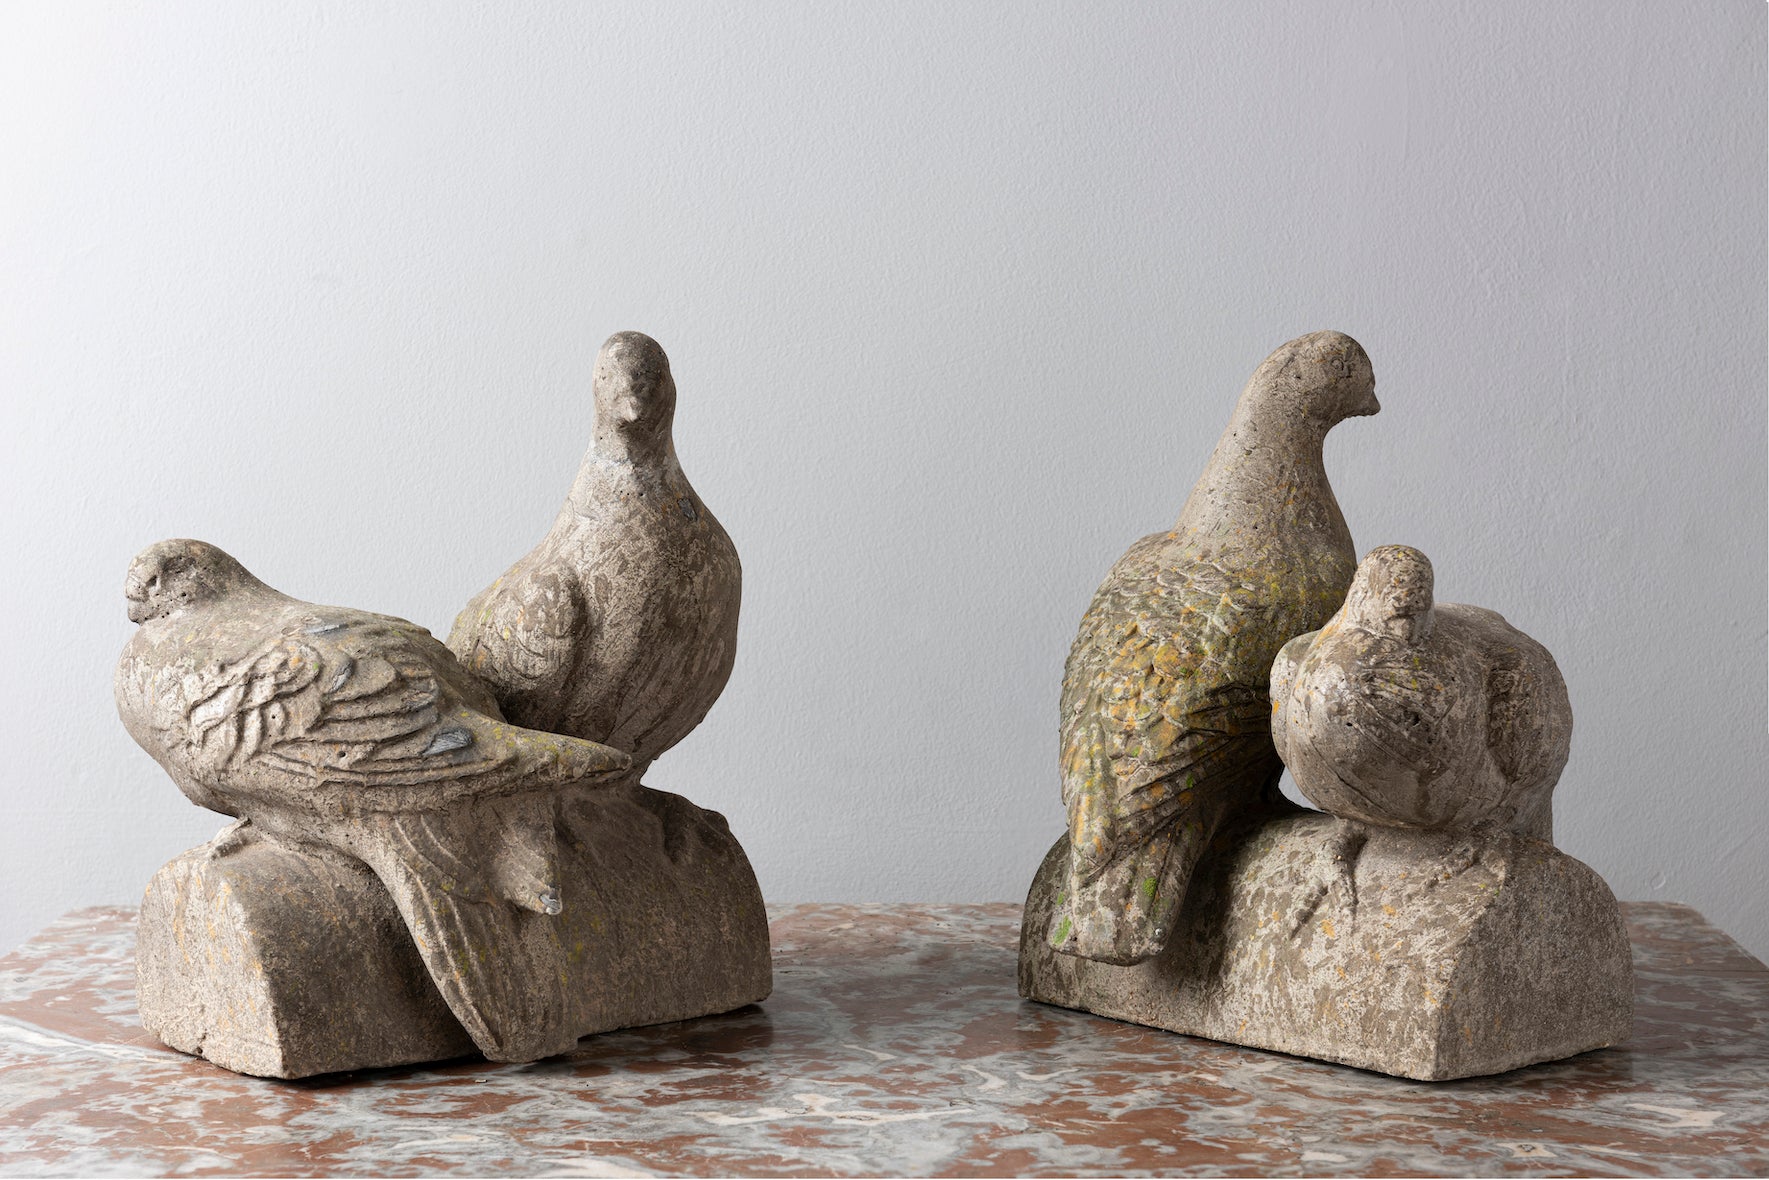 SOLD A garden sculpture in the form of two doves roosting